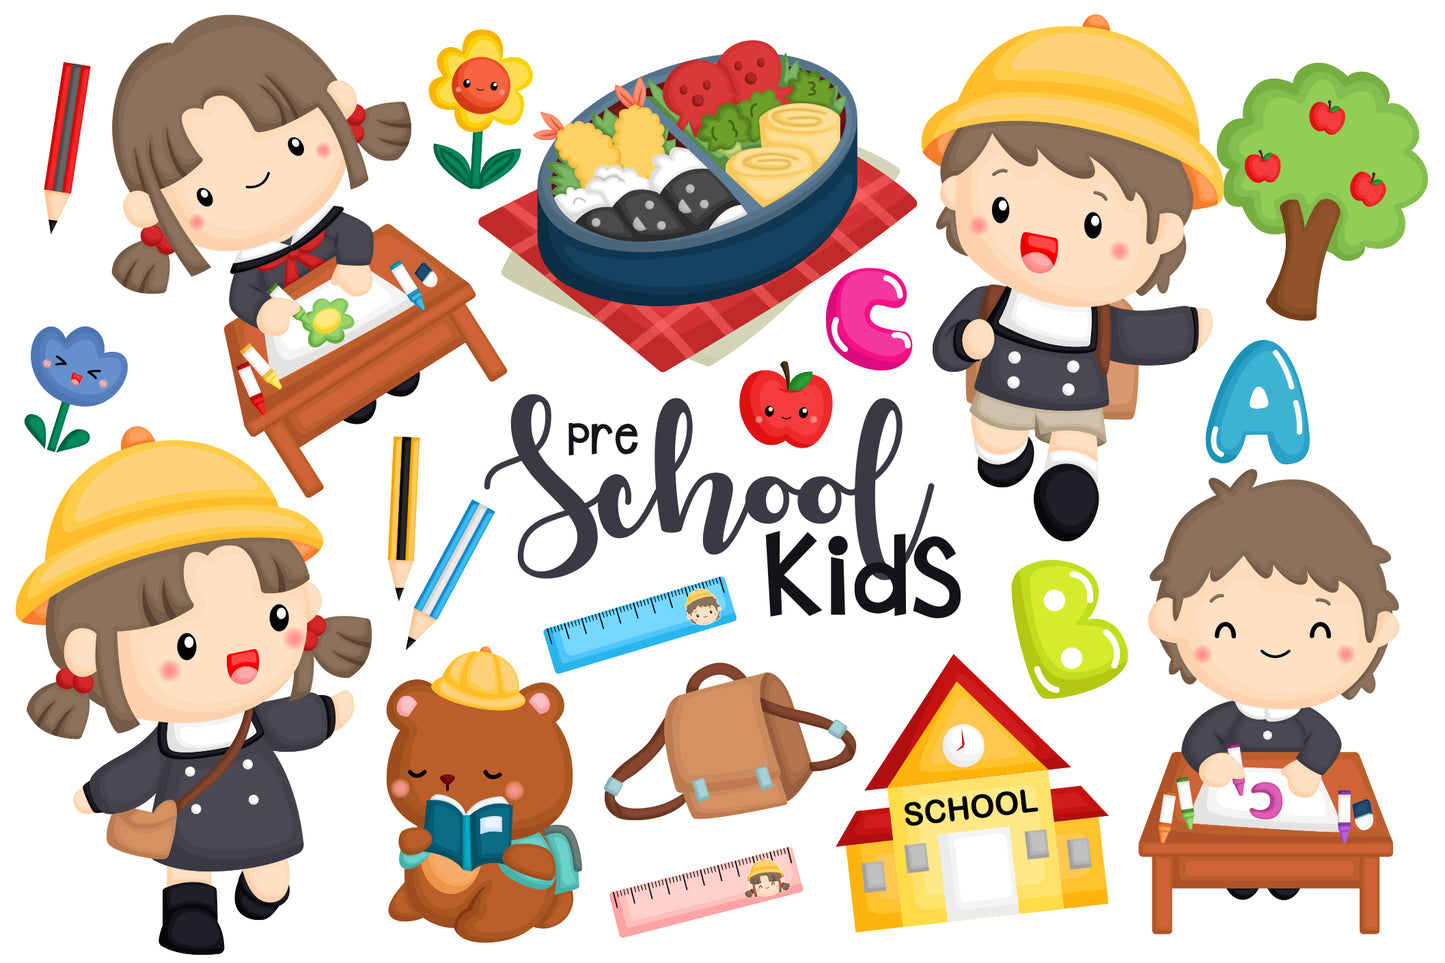 Preschool Kids Clipart - Learning and Study Clip Art